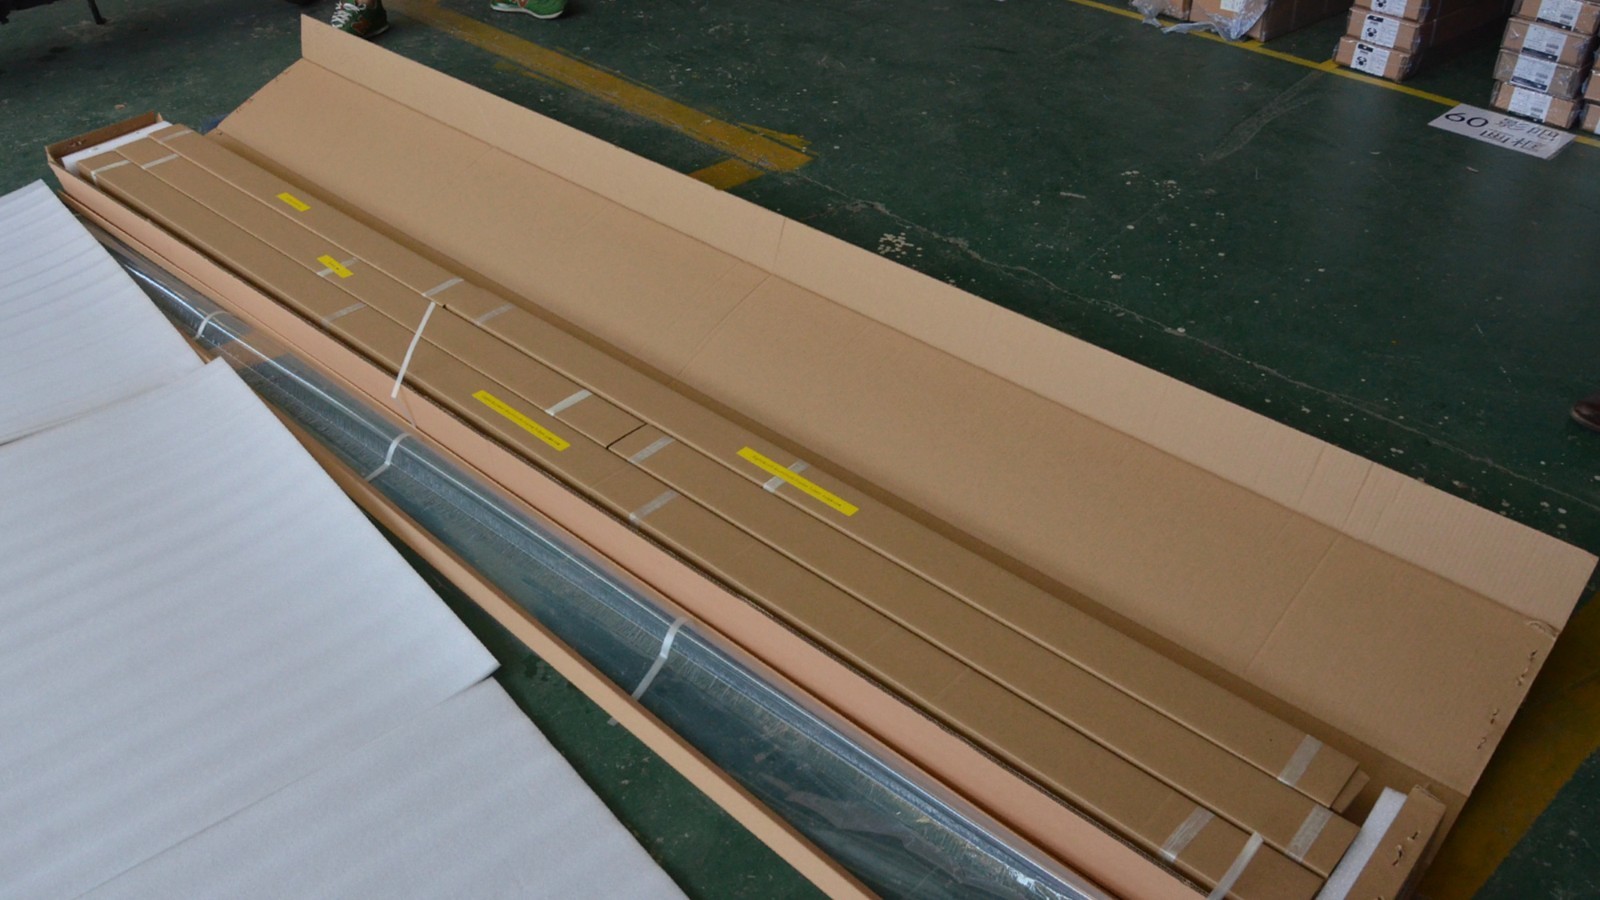 XY Screens curved projector screen wholesale for ktv